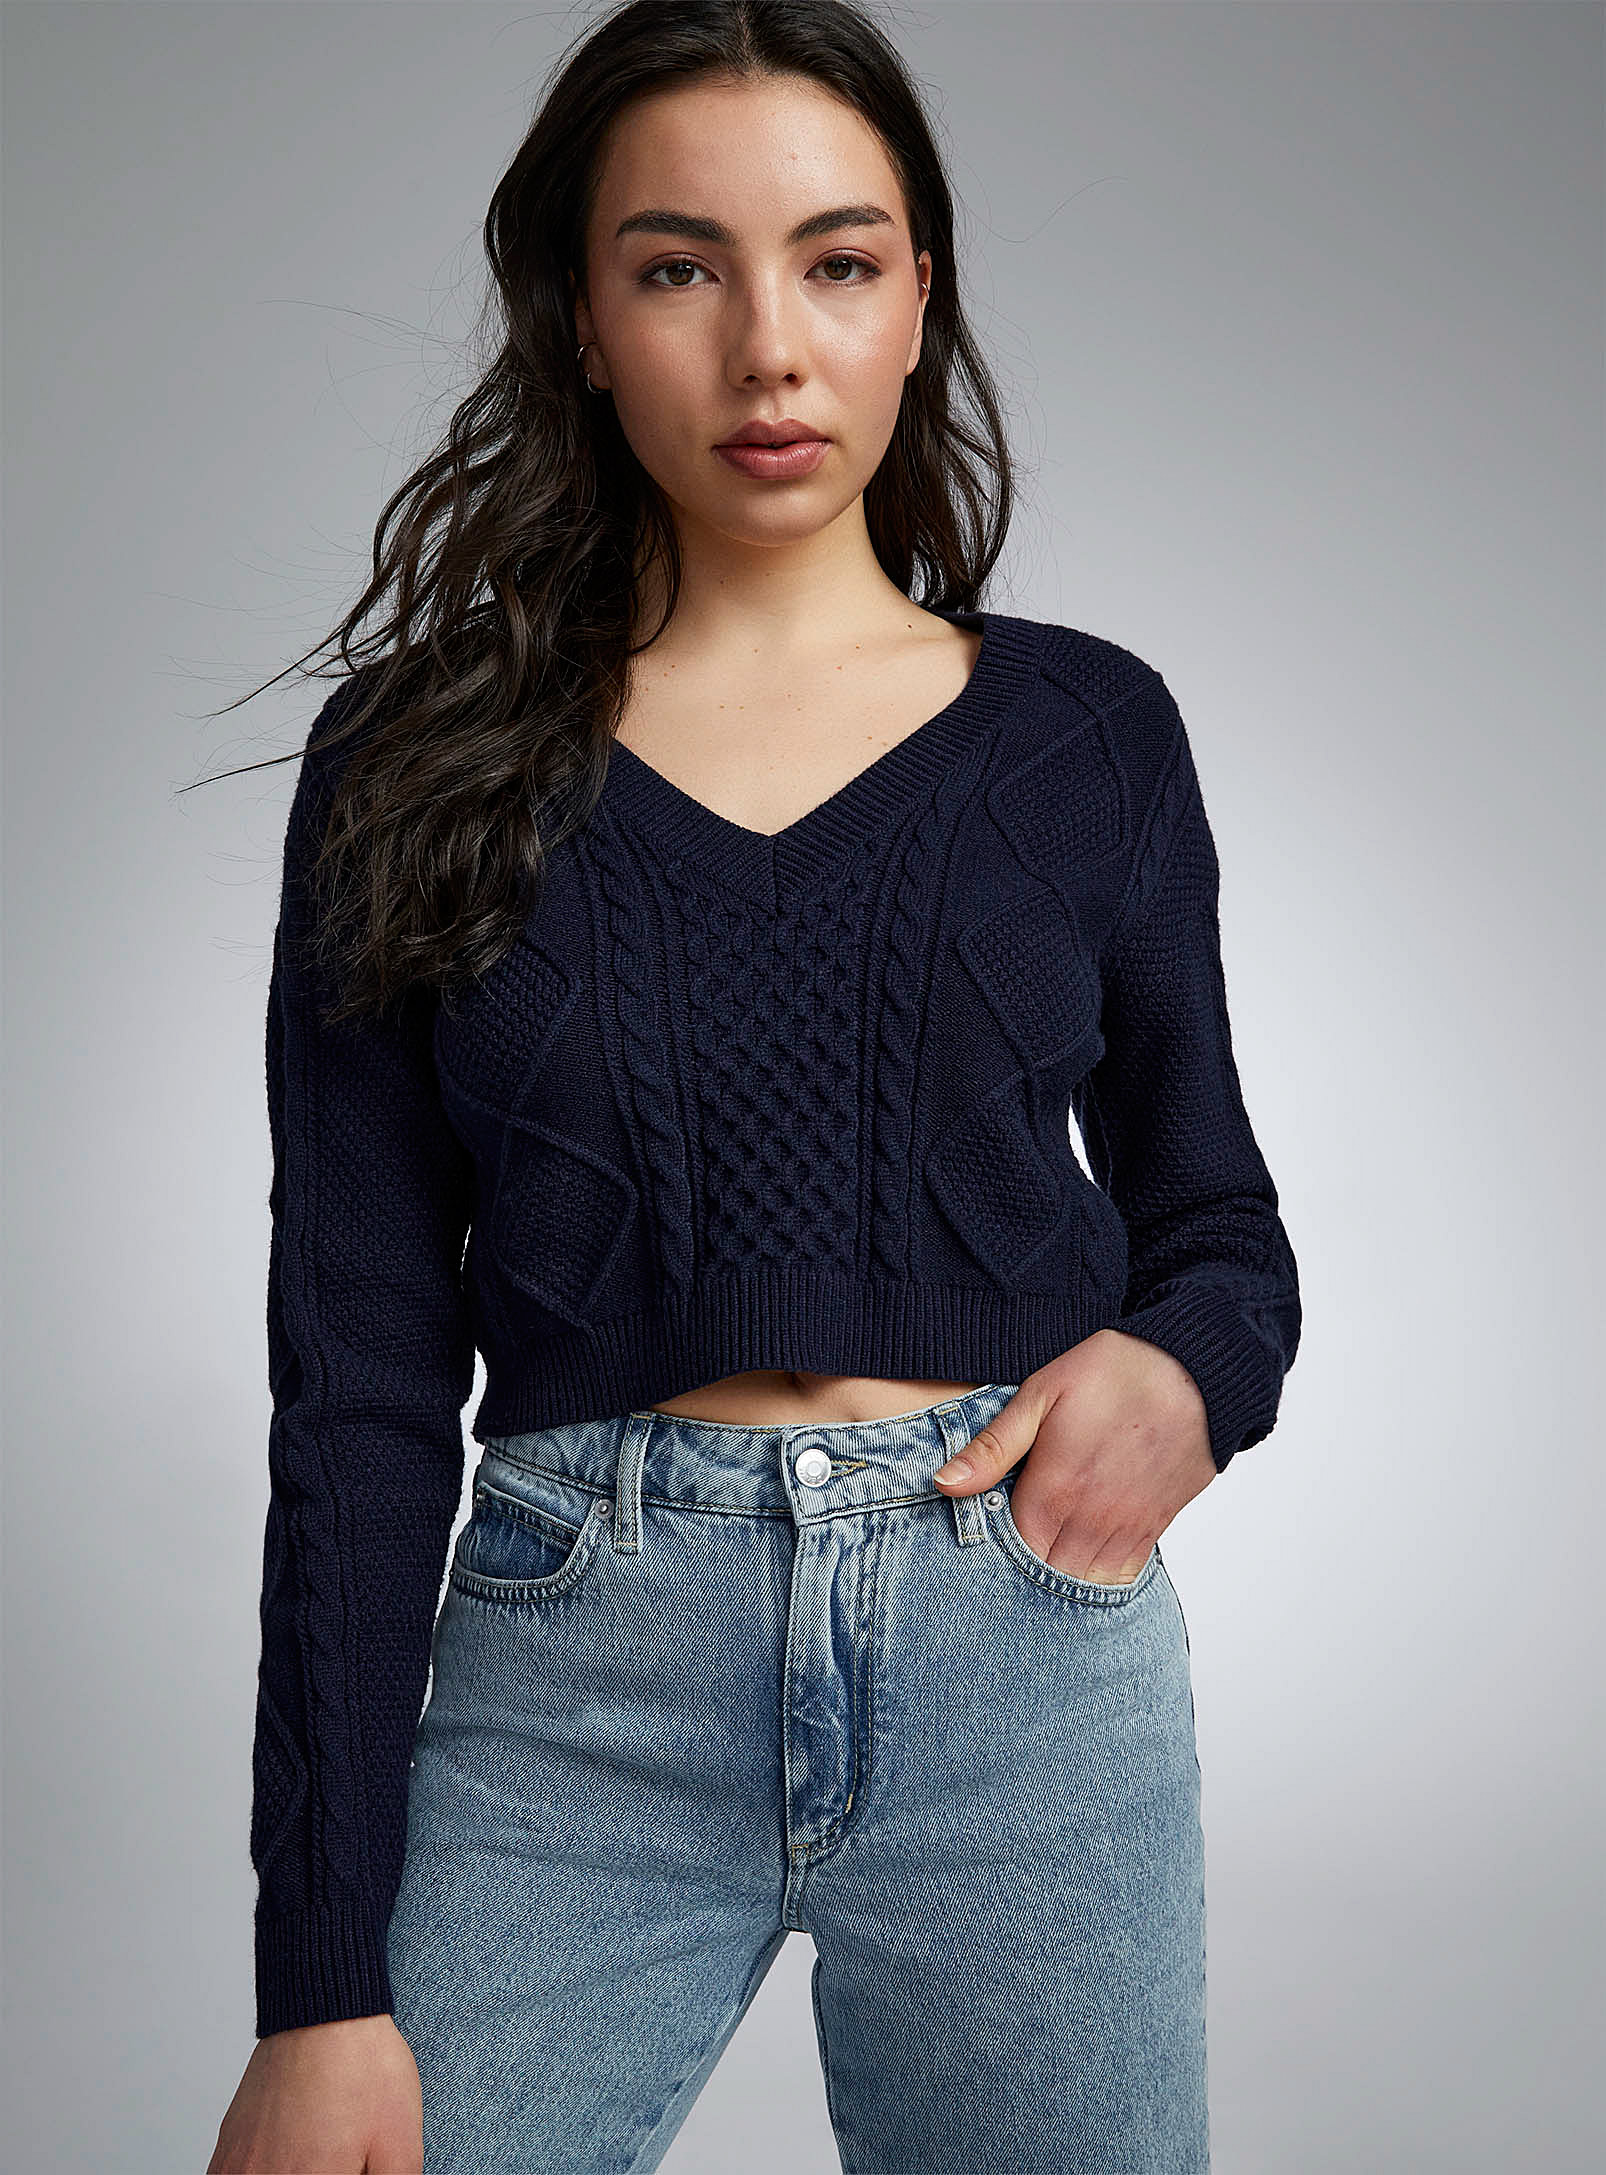 Twik Cables And Diamonds Cropped Sweater In Marine Blue